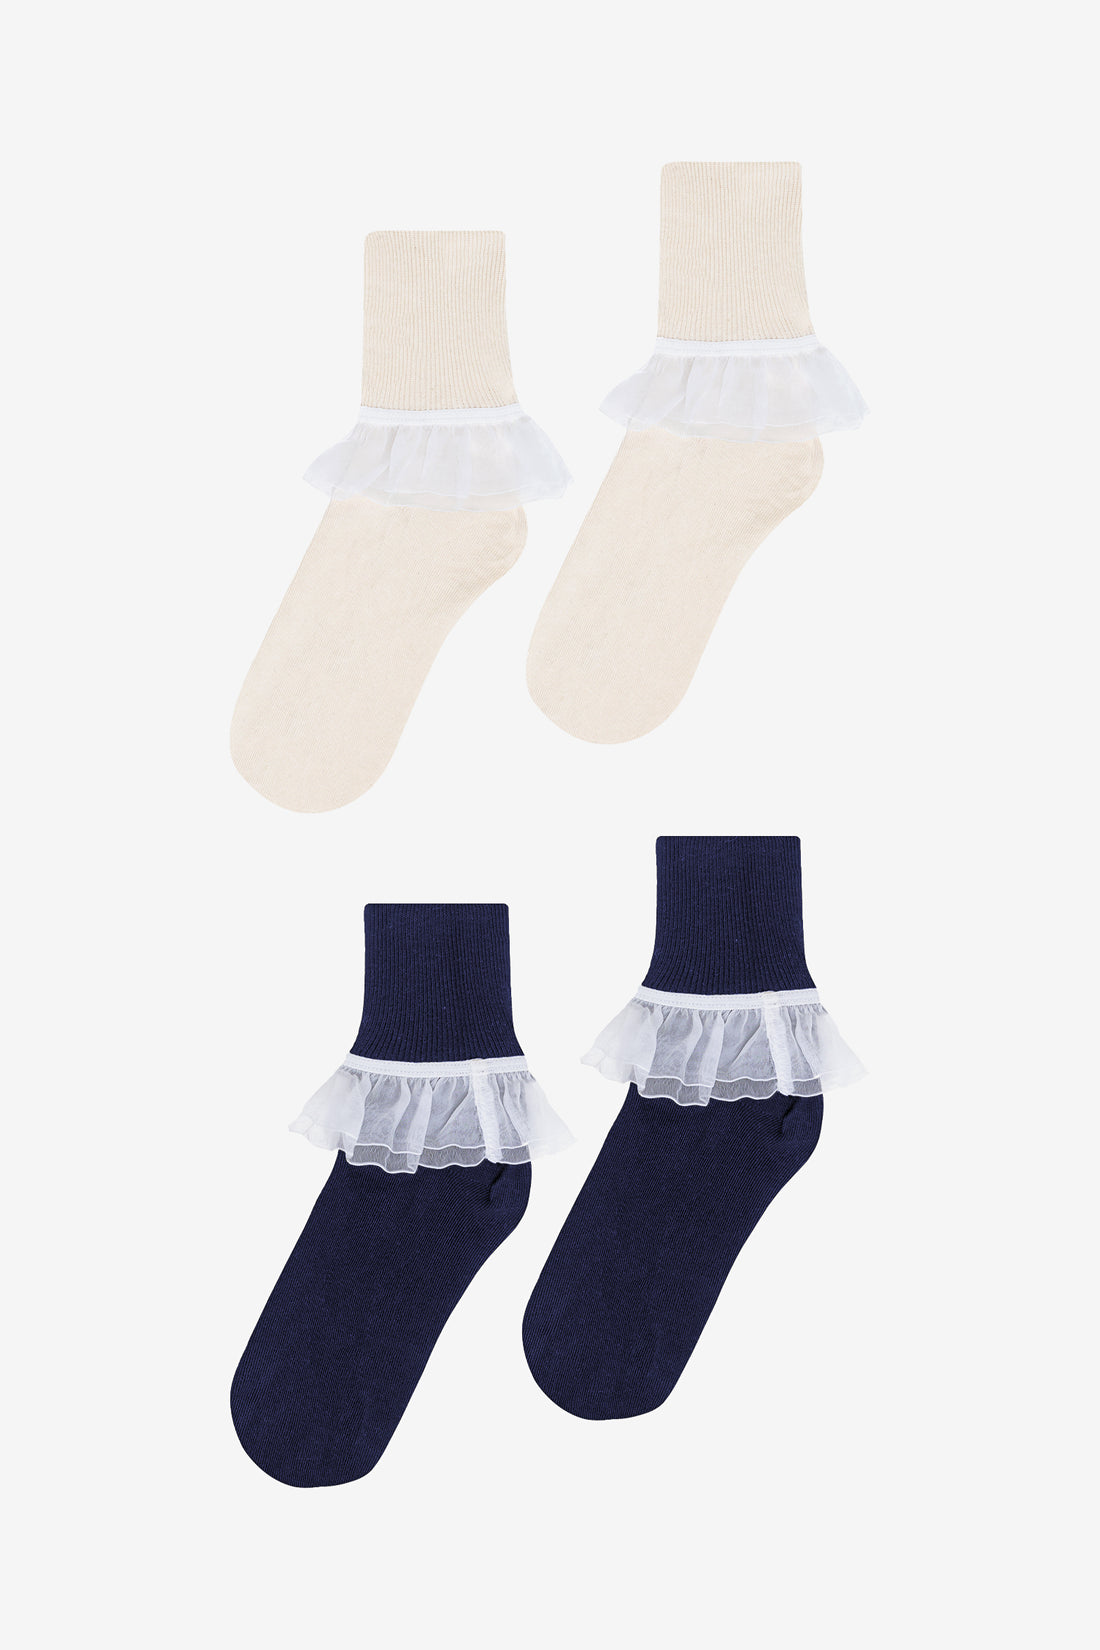 AKLSOCK-L2 - 2-Pack Girly Lace Ankle Sock – Los Angeles Apparel